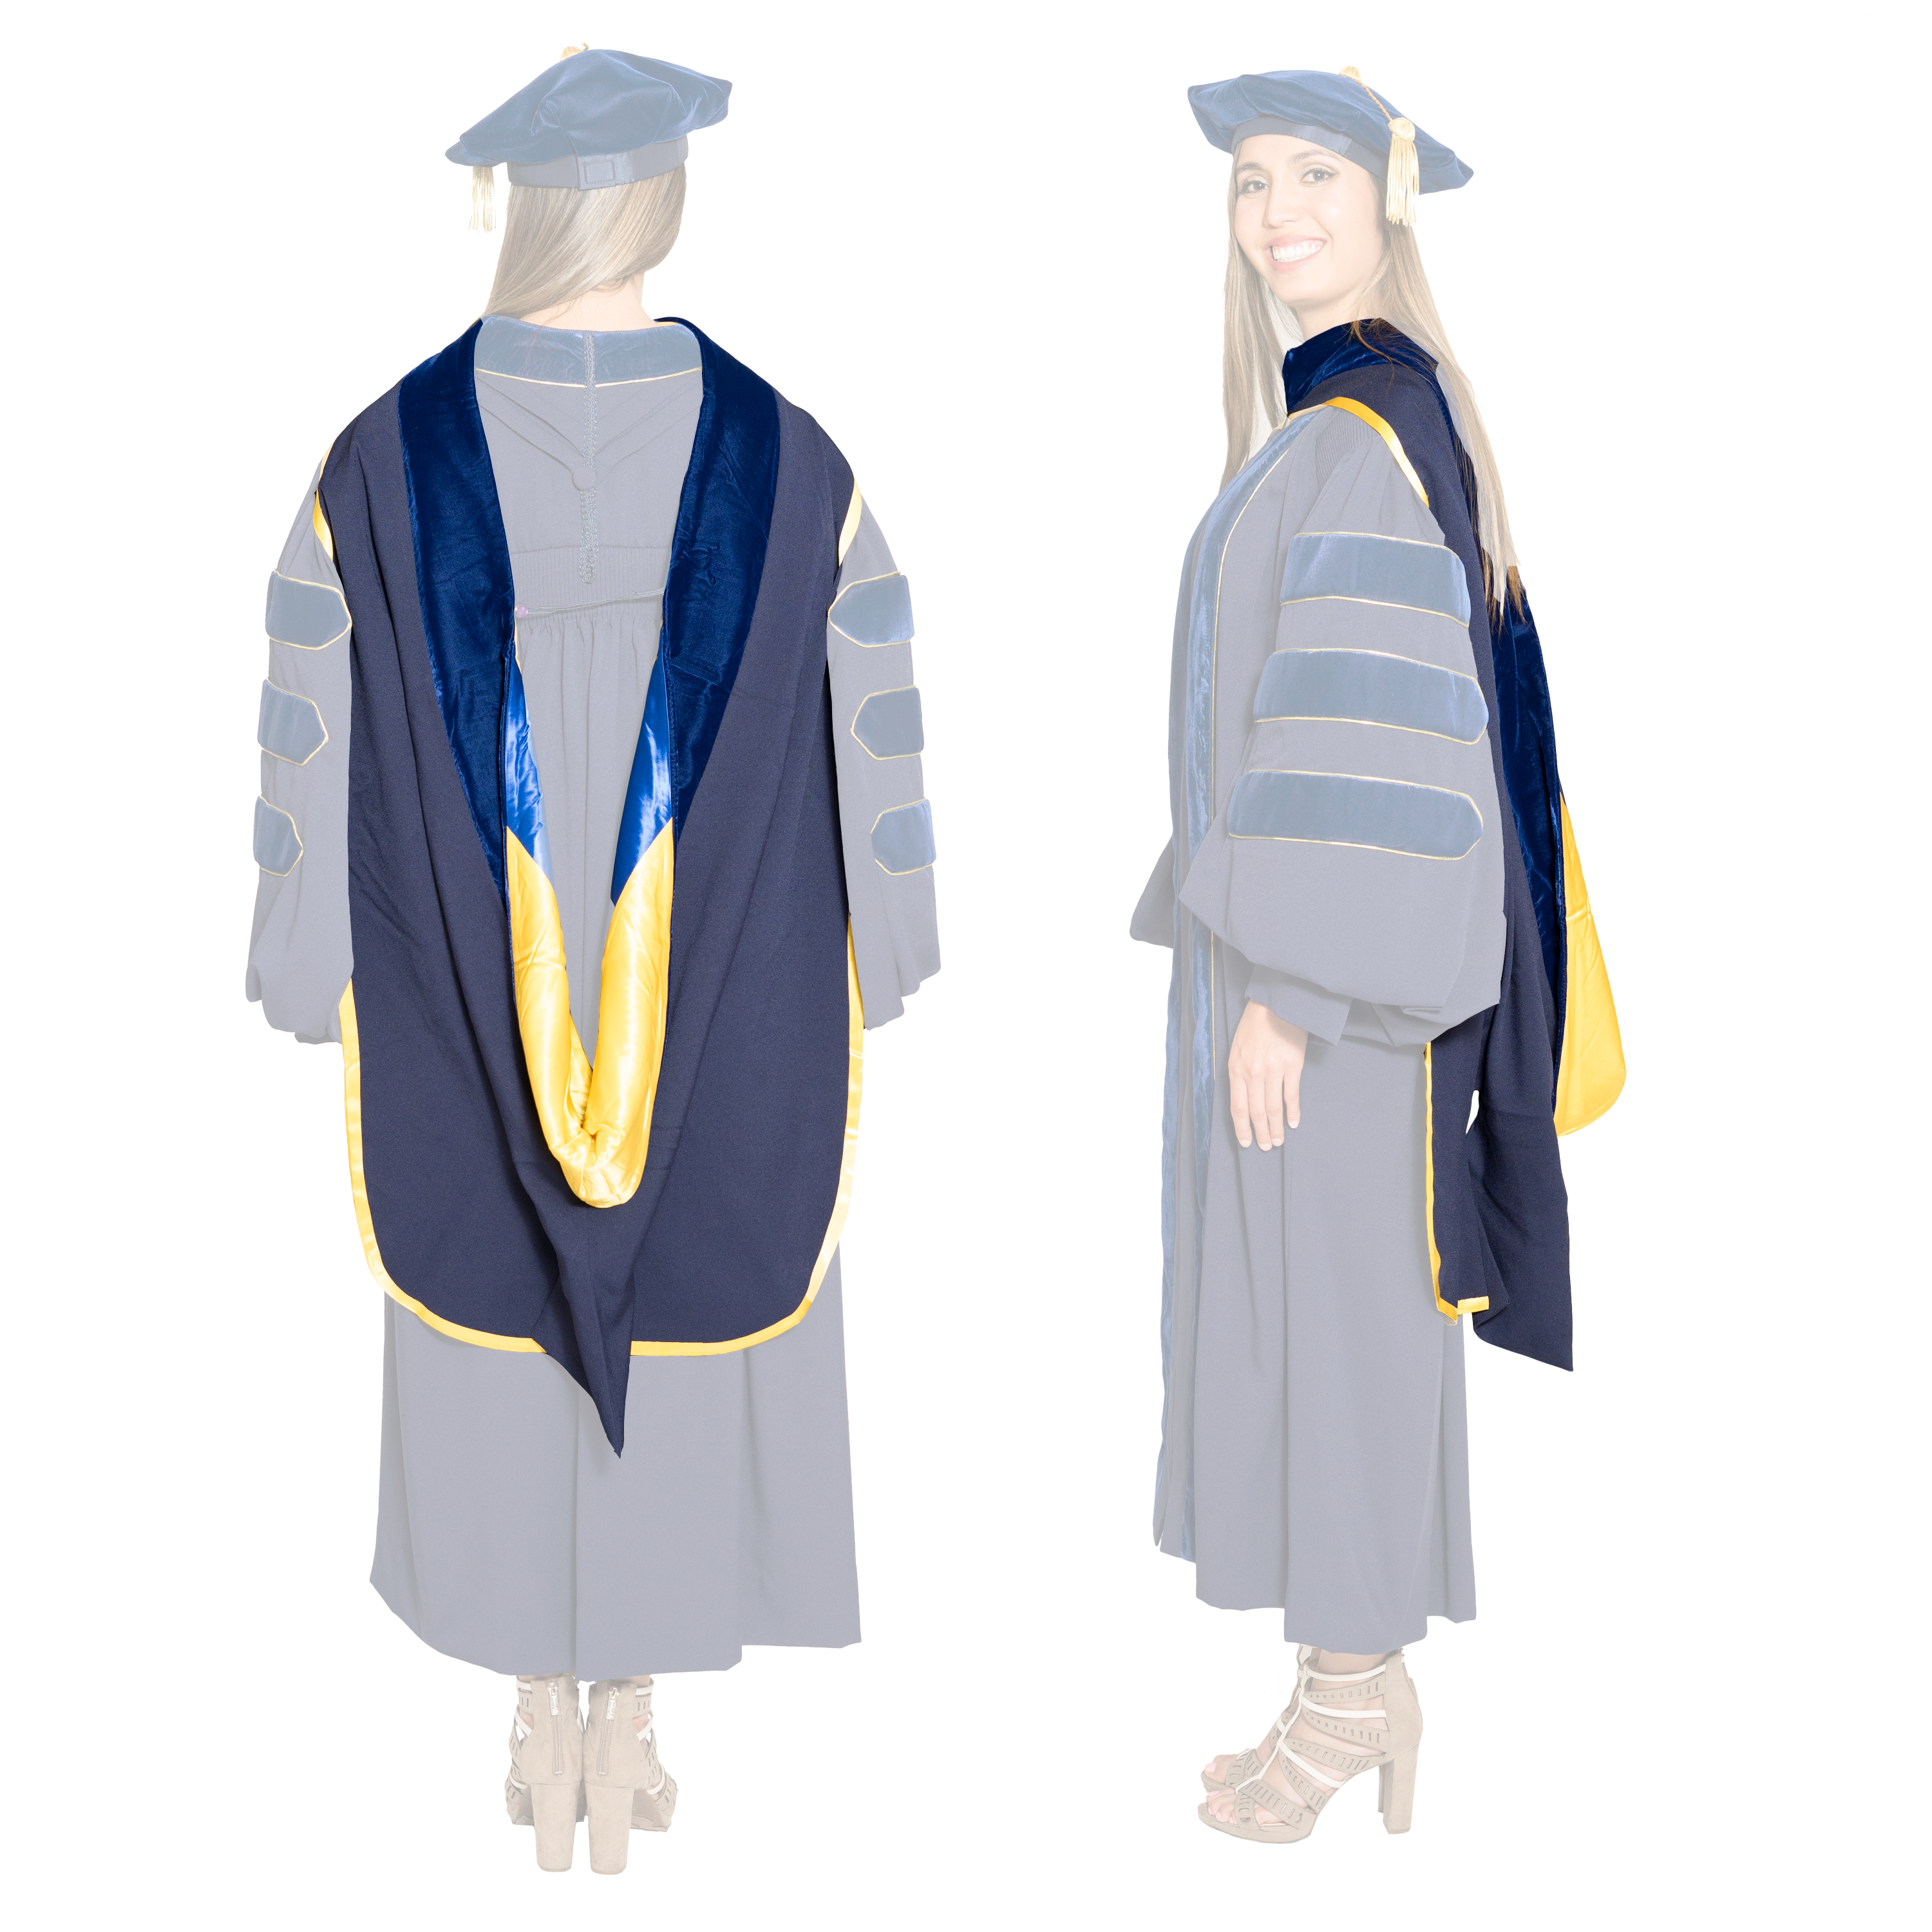 Doctoral Deluxe Package (Includes Hood and Tam) - University Cap & Gown